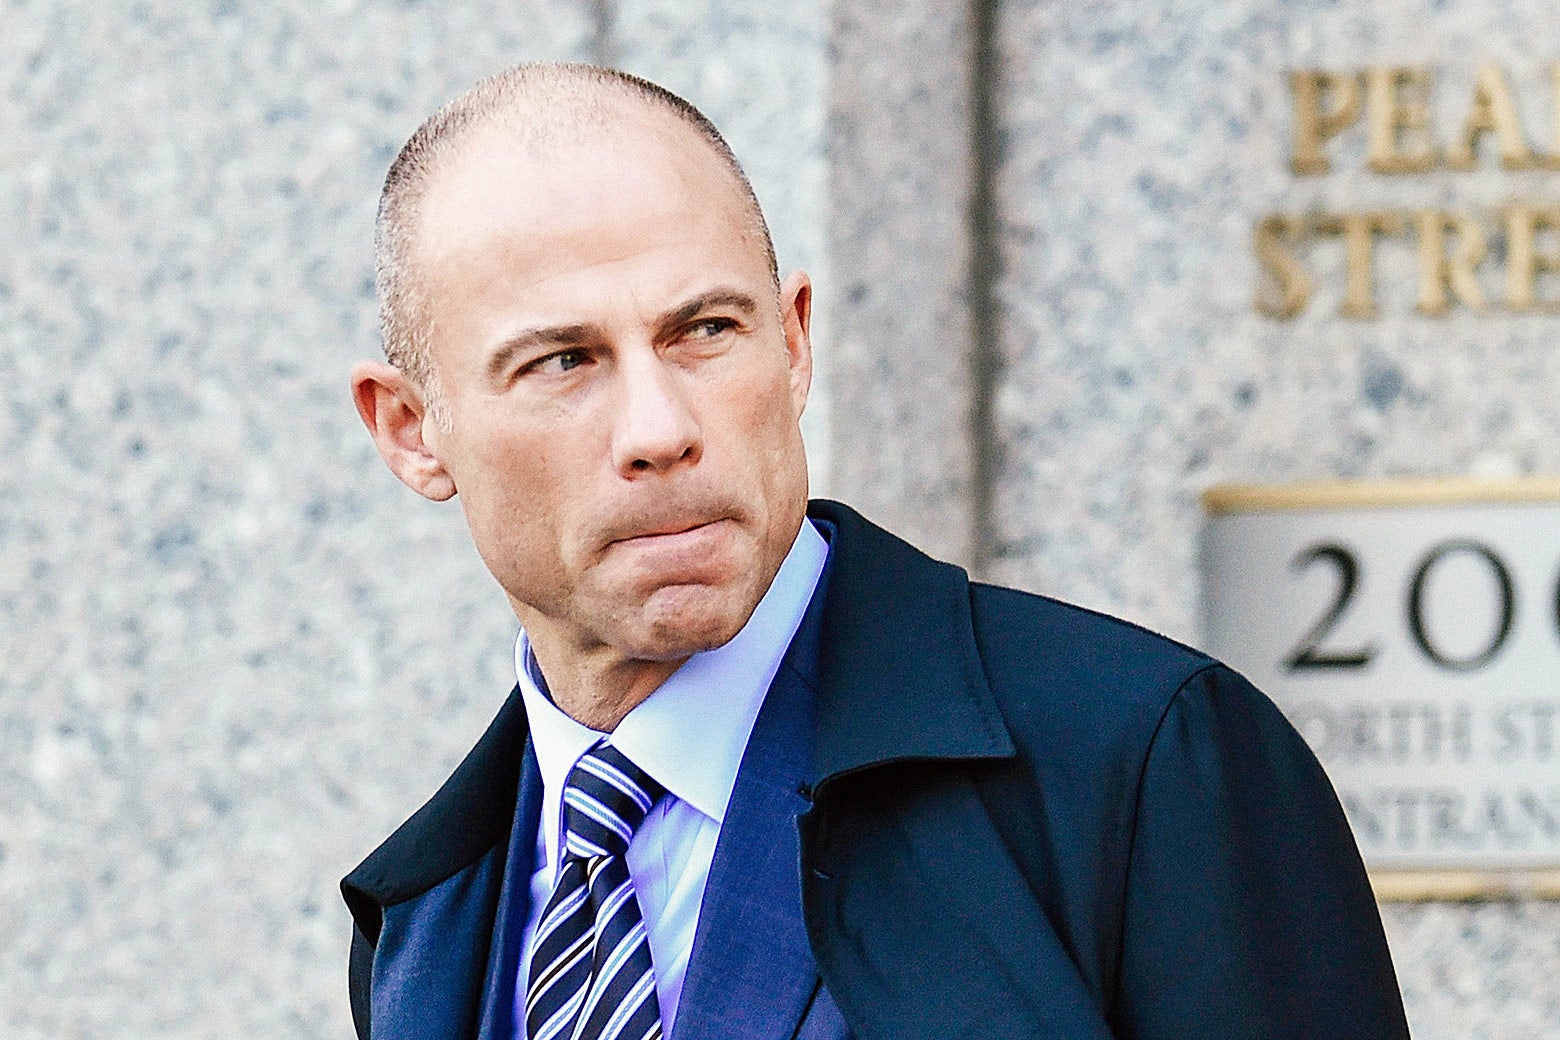 Michael Avenatti exits the the U.S. Courthouse in New York on April 26.